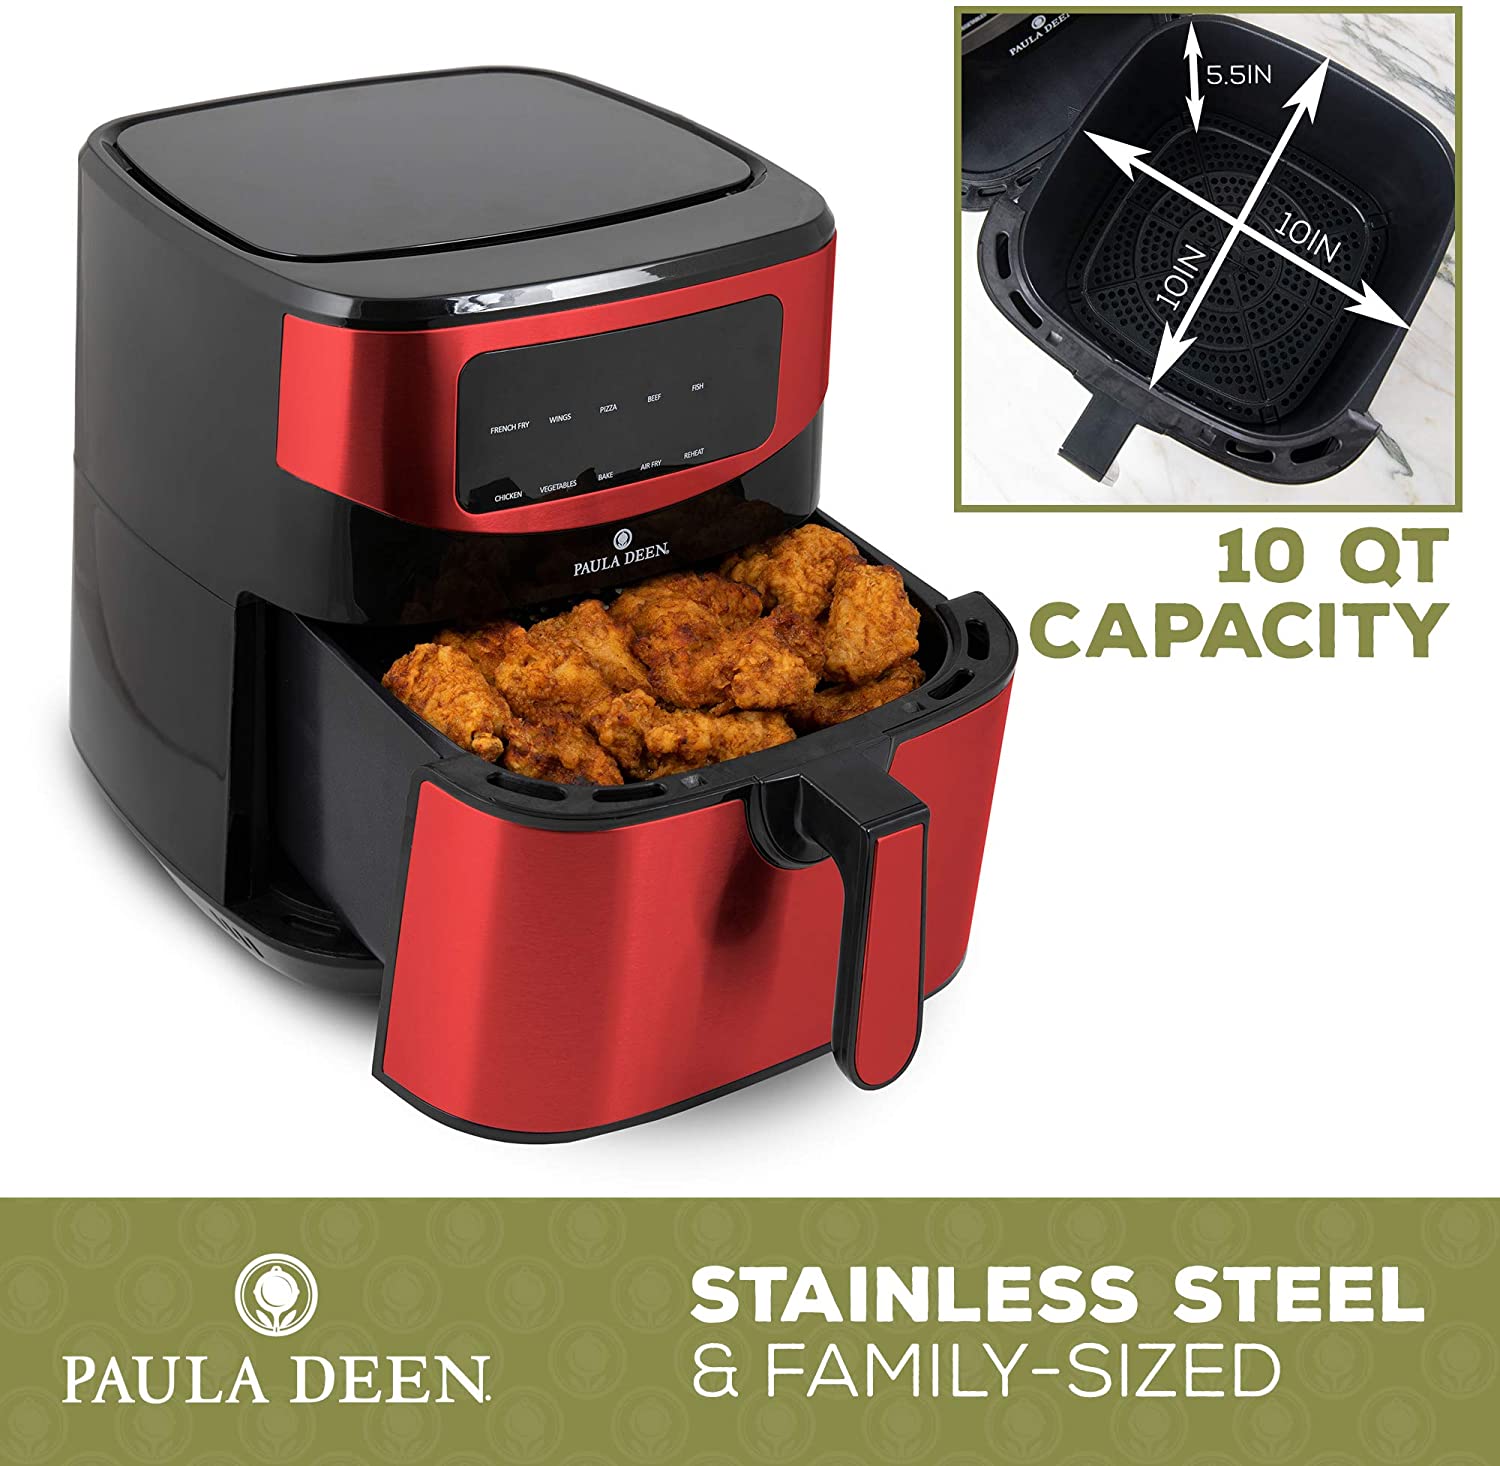 Paula Deen PDKDF579RR-RB Stainless Steel 10Qt Air Fryer, Red Stainless - Certified Refurbished